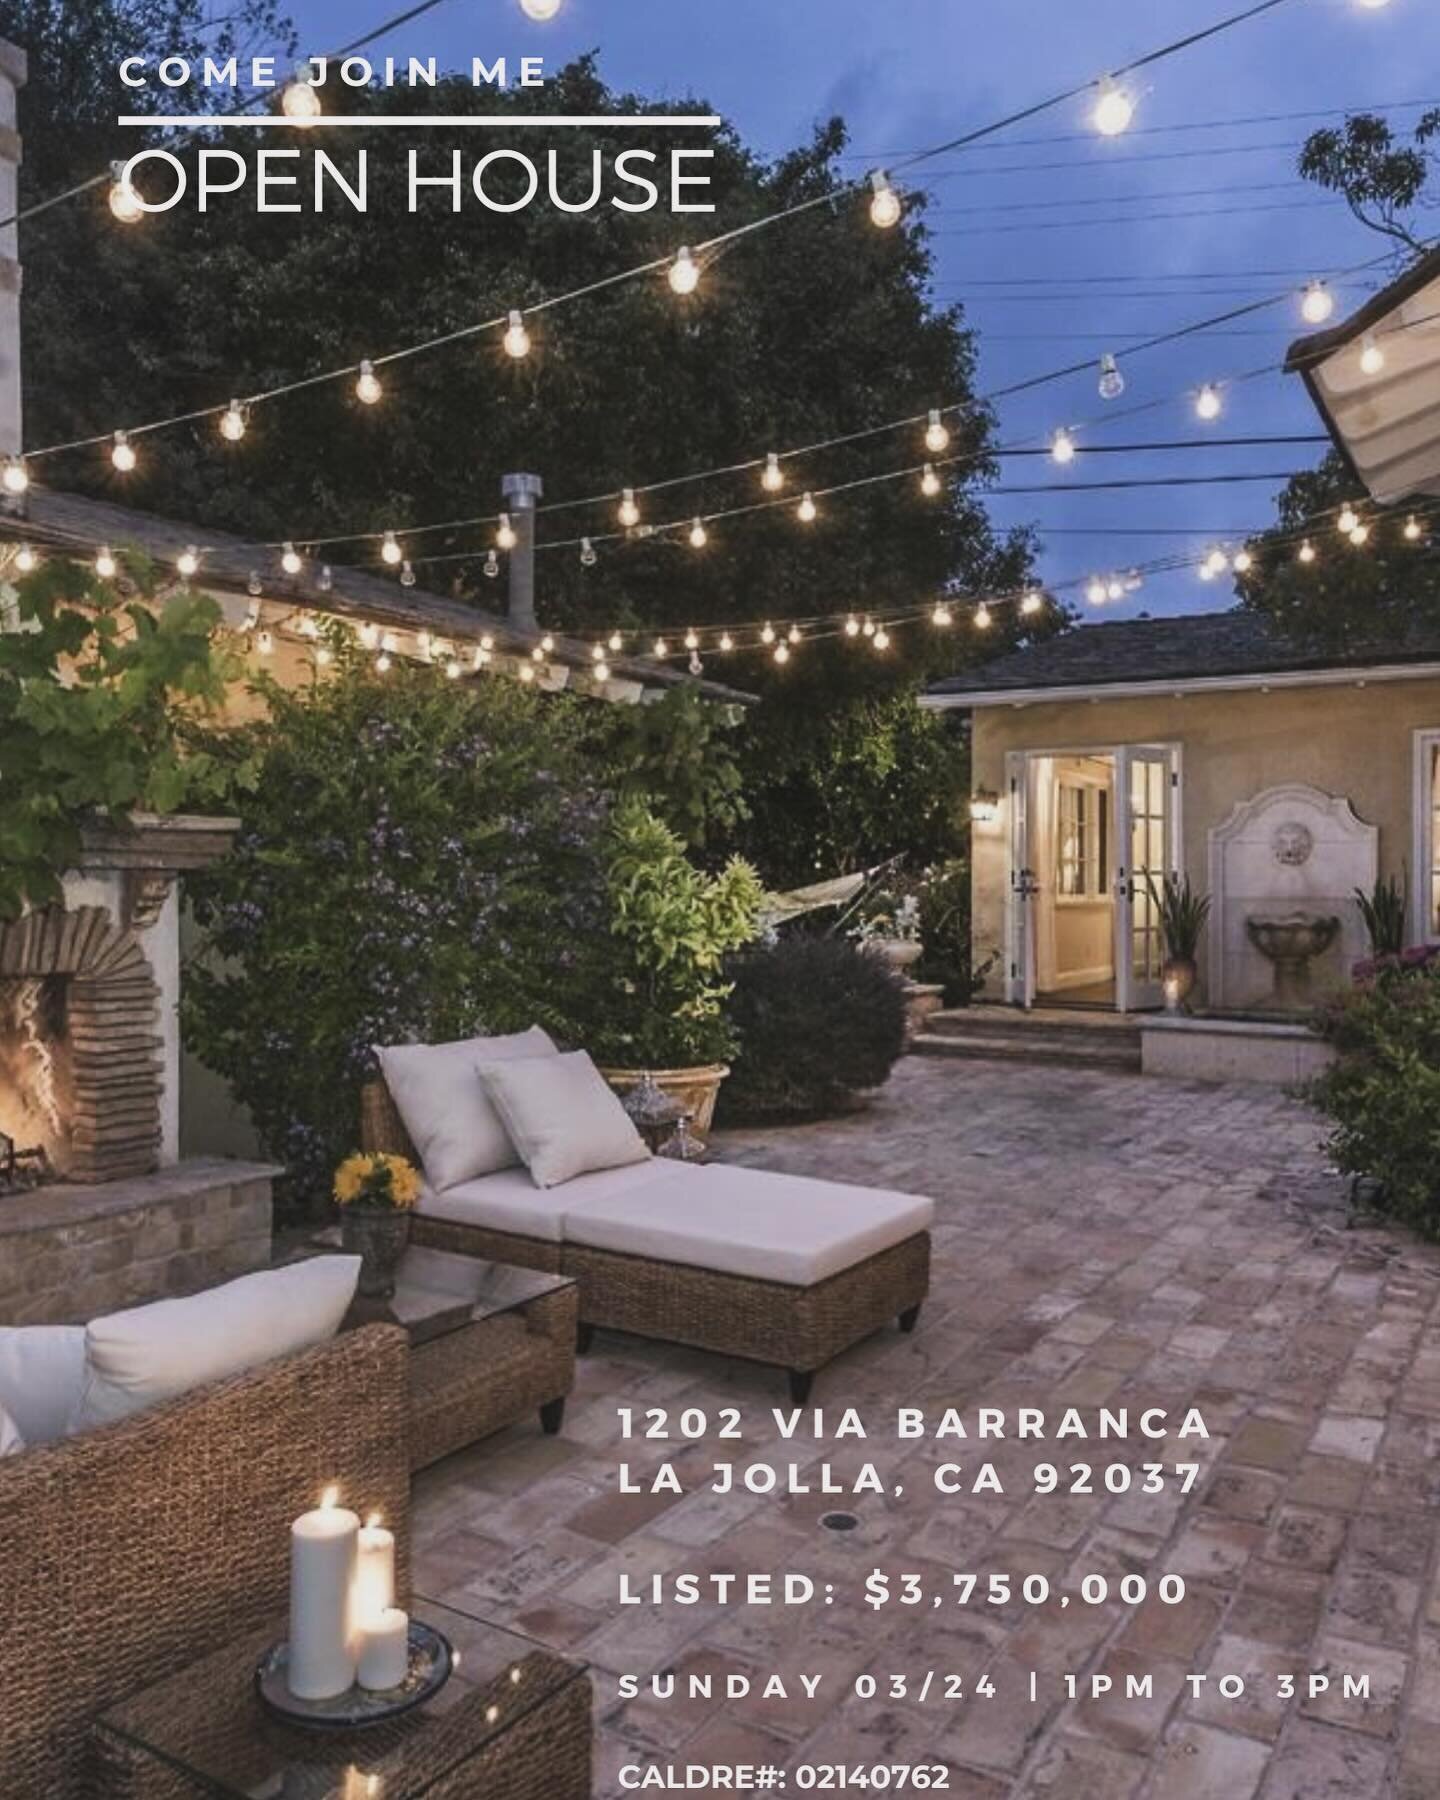 Exceptional craftsmanship and high end materials throughout this 4 bedroom, 3 bath single level home on a corner lot in the Muirlands Village neighborhood of La Jolla. DM with any questions and as always join me on Sunday if you&rsquo;re interested. 